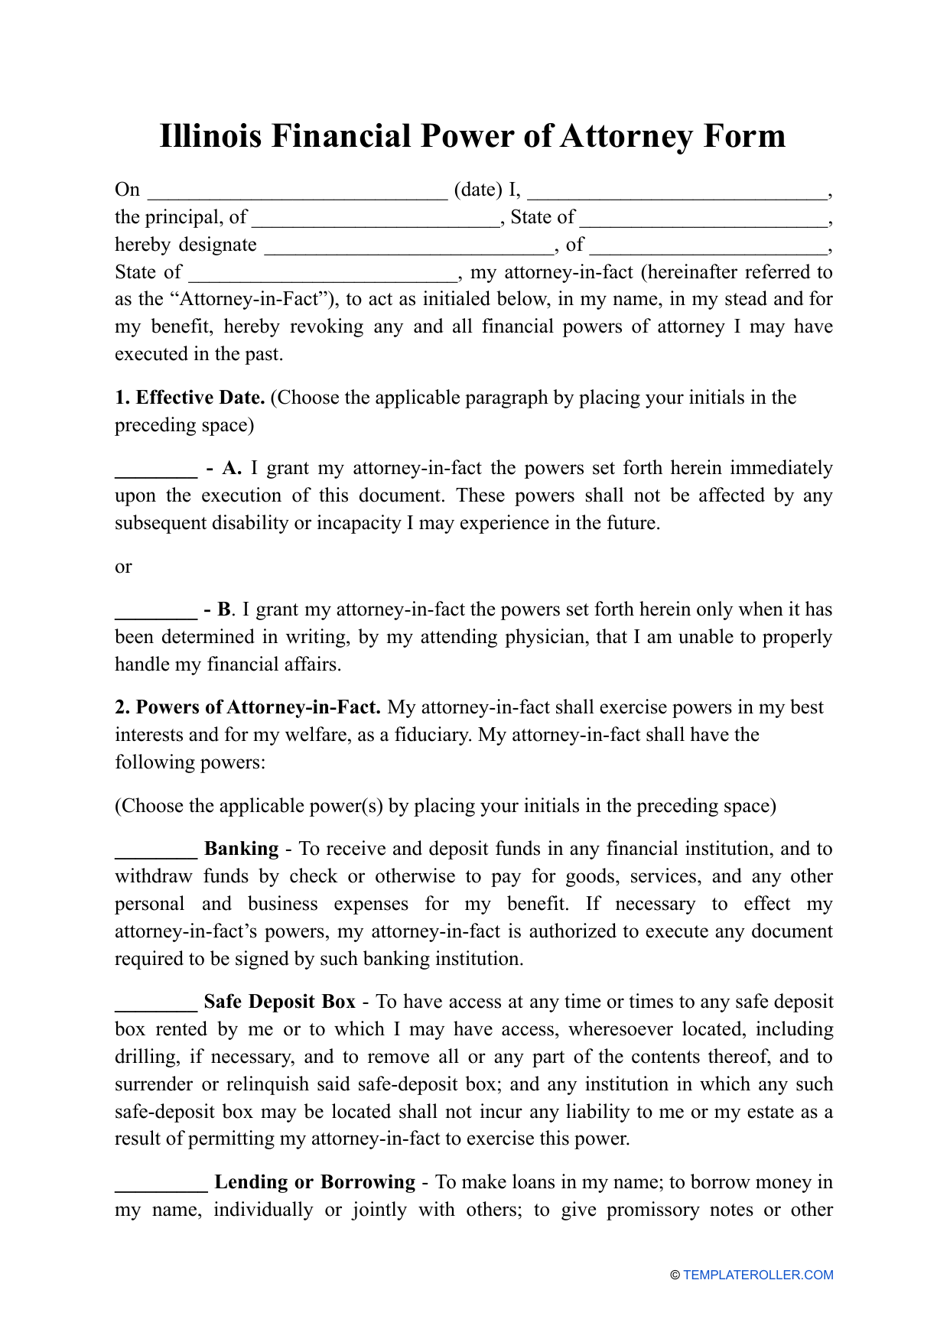 Financial Power of Attorney Form - Illinois, Page 1